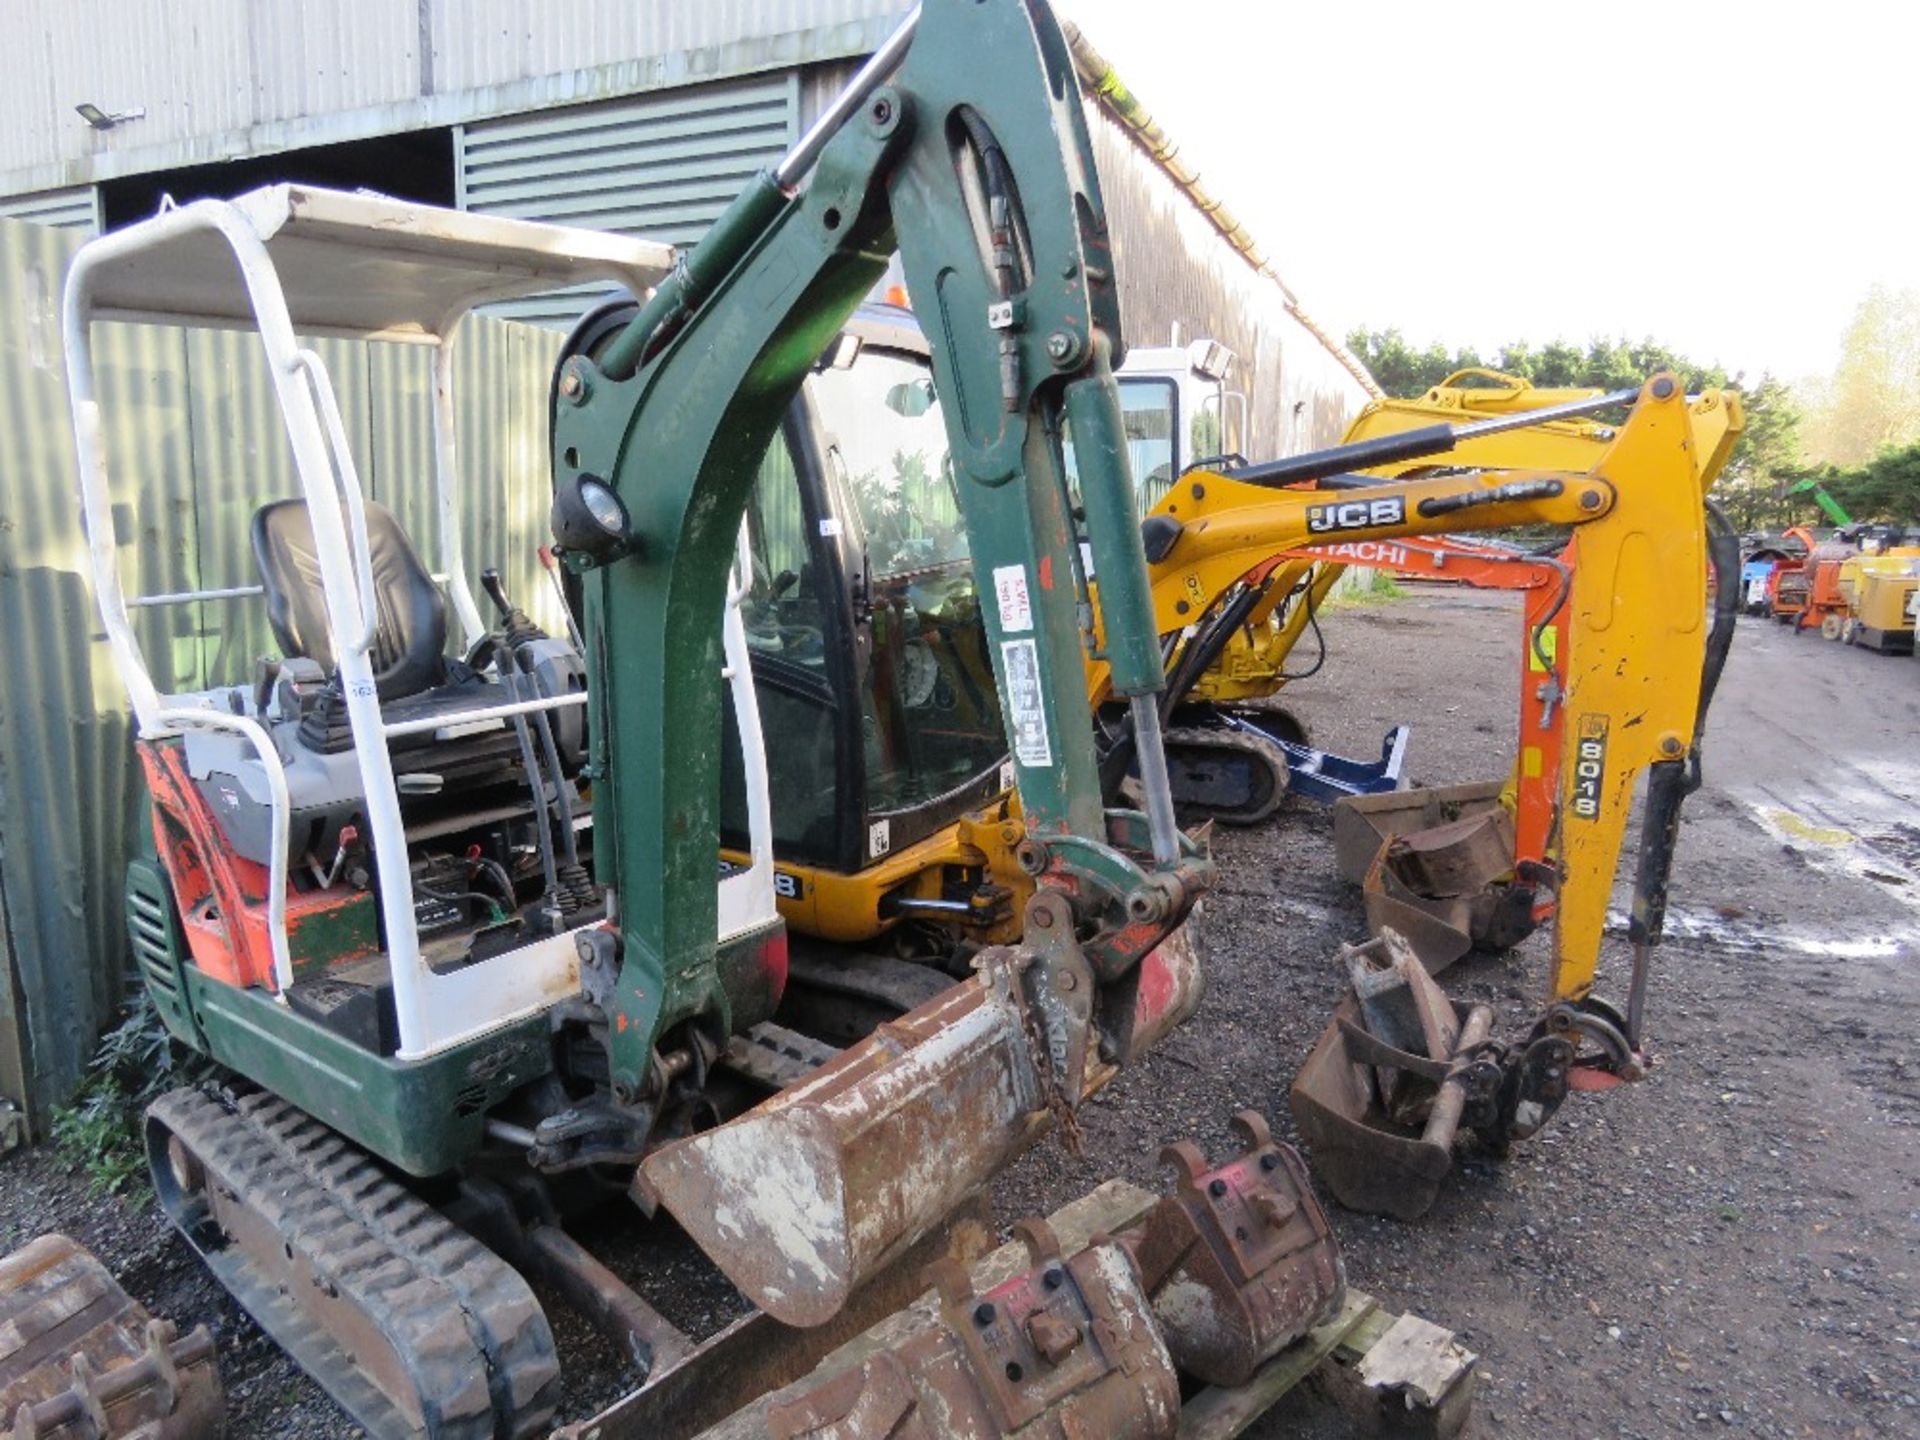 KUBOTA KX41-3V RUBBER TRACKED MINI EXCAVATOR, YEAR 2005. 2443 RECORDED HOURS. SN: 055938. WITH 3 BUC